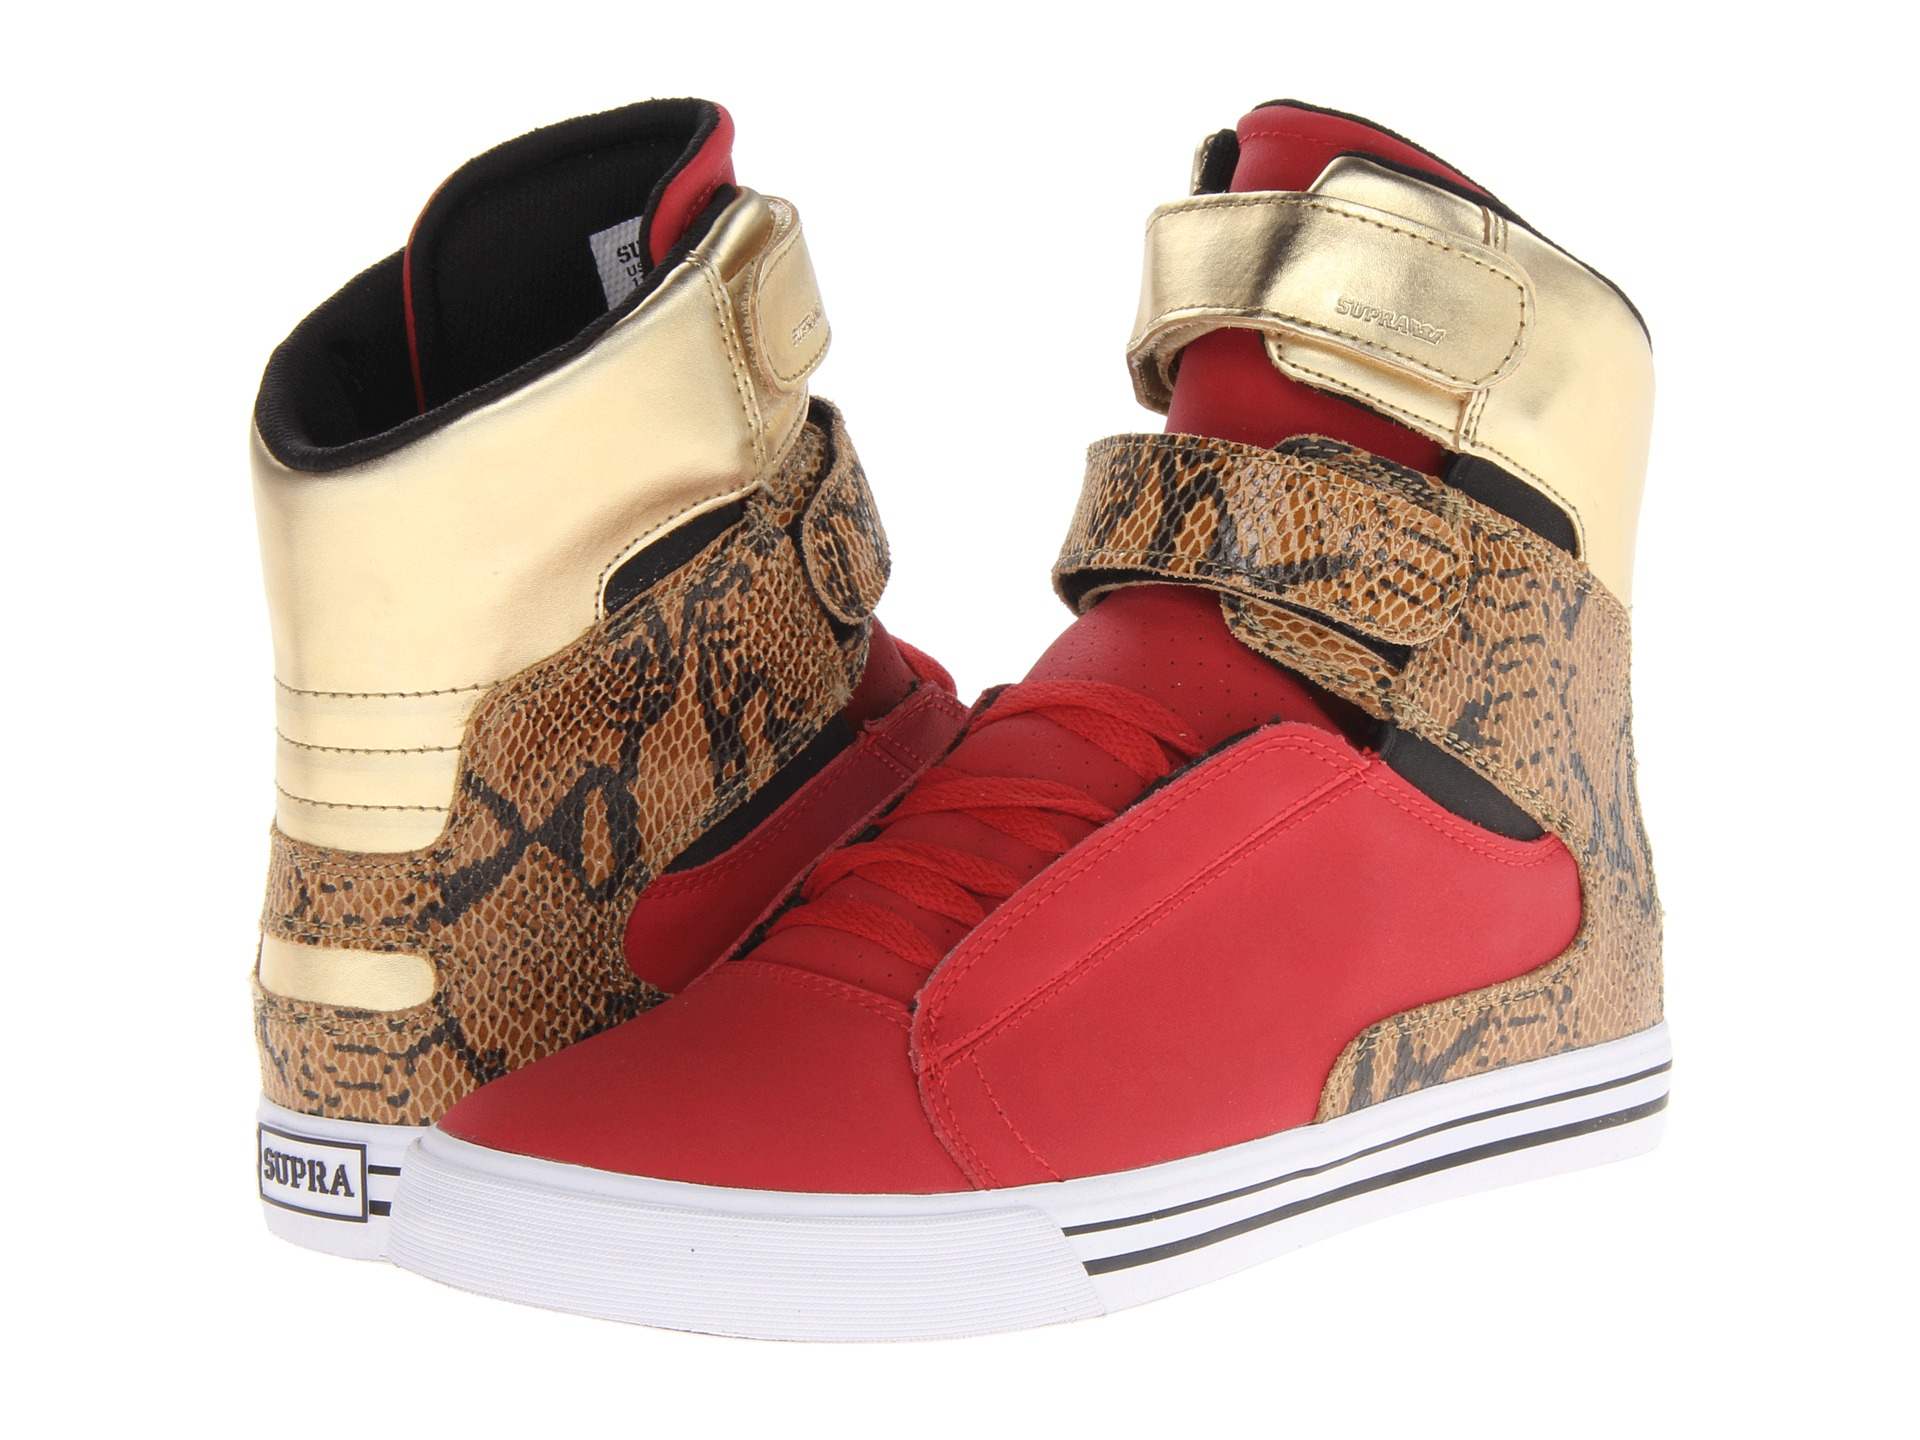 Supra Society Ii in Red/Gold/White (Red 